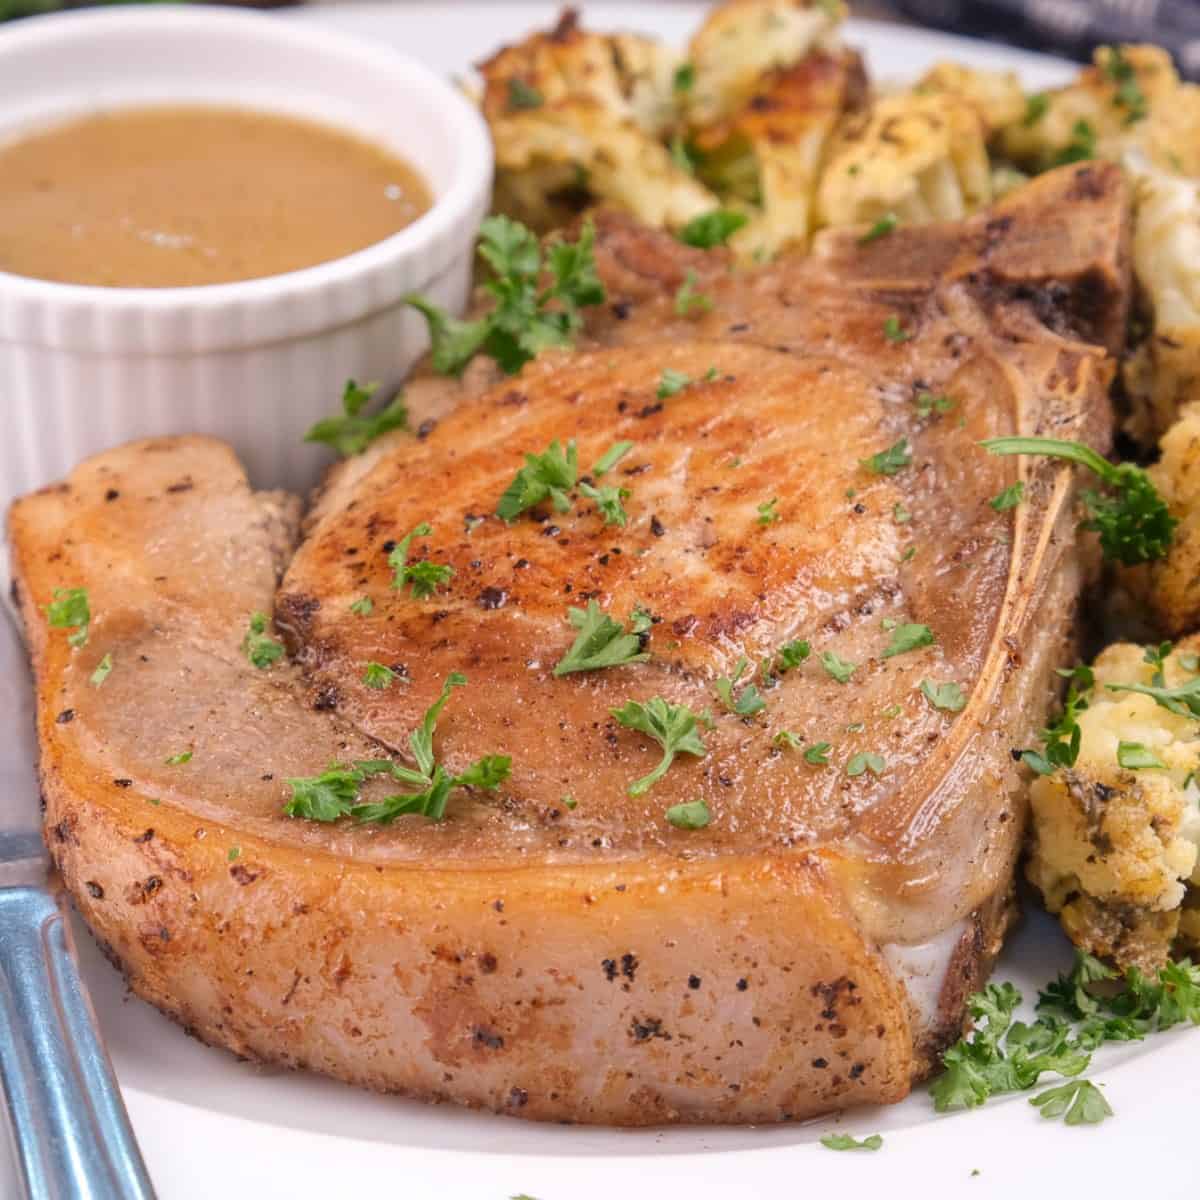 Keto oven-baked bone-in pork chops recipe served with a sauce.